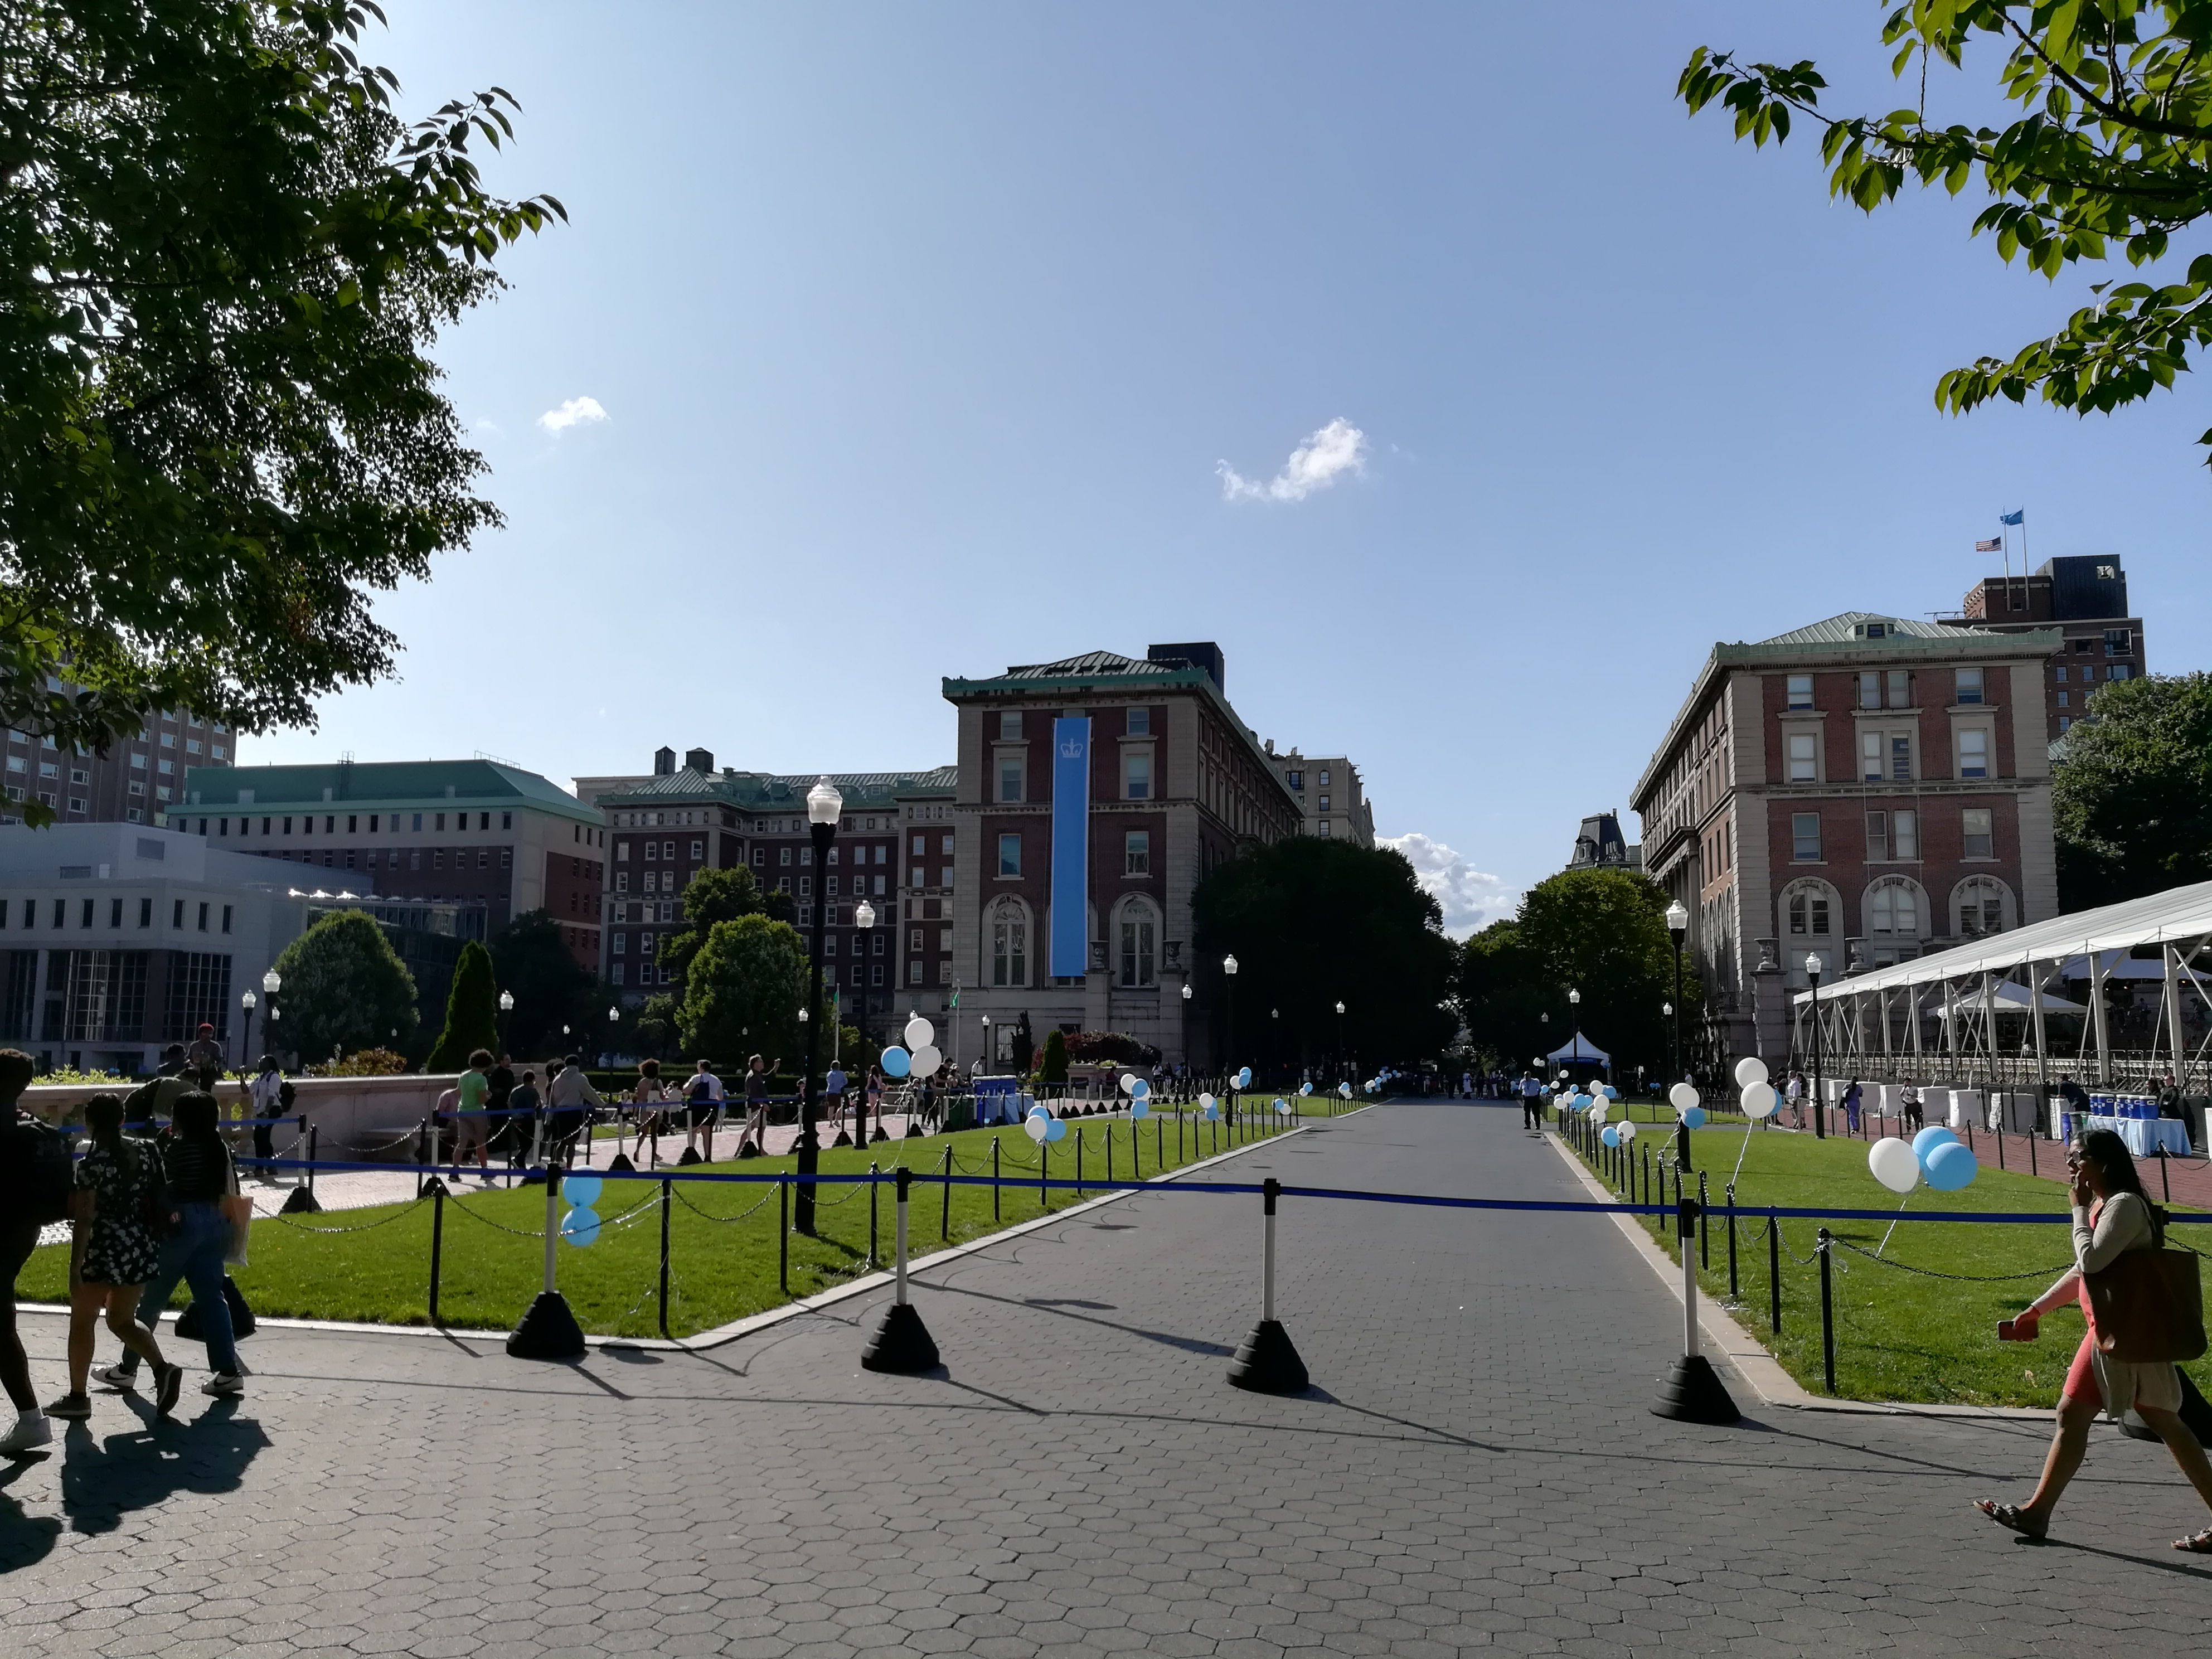 A view of a large building with a blue banner on it - Columbia University